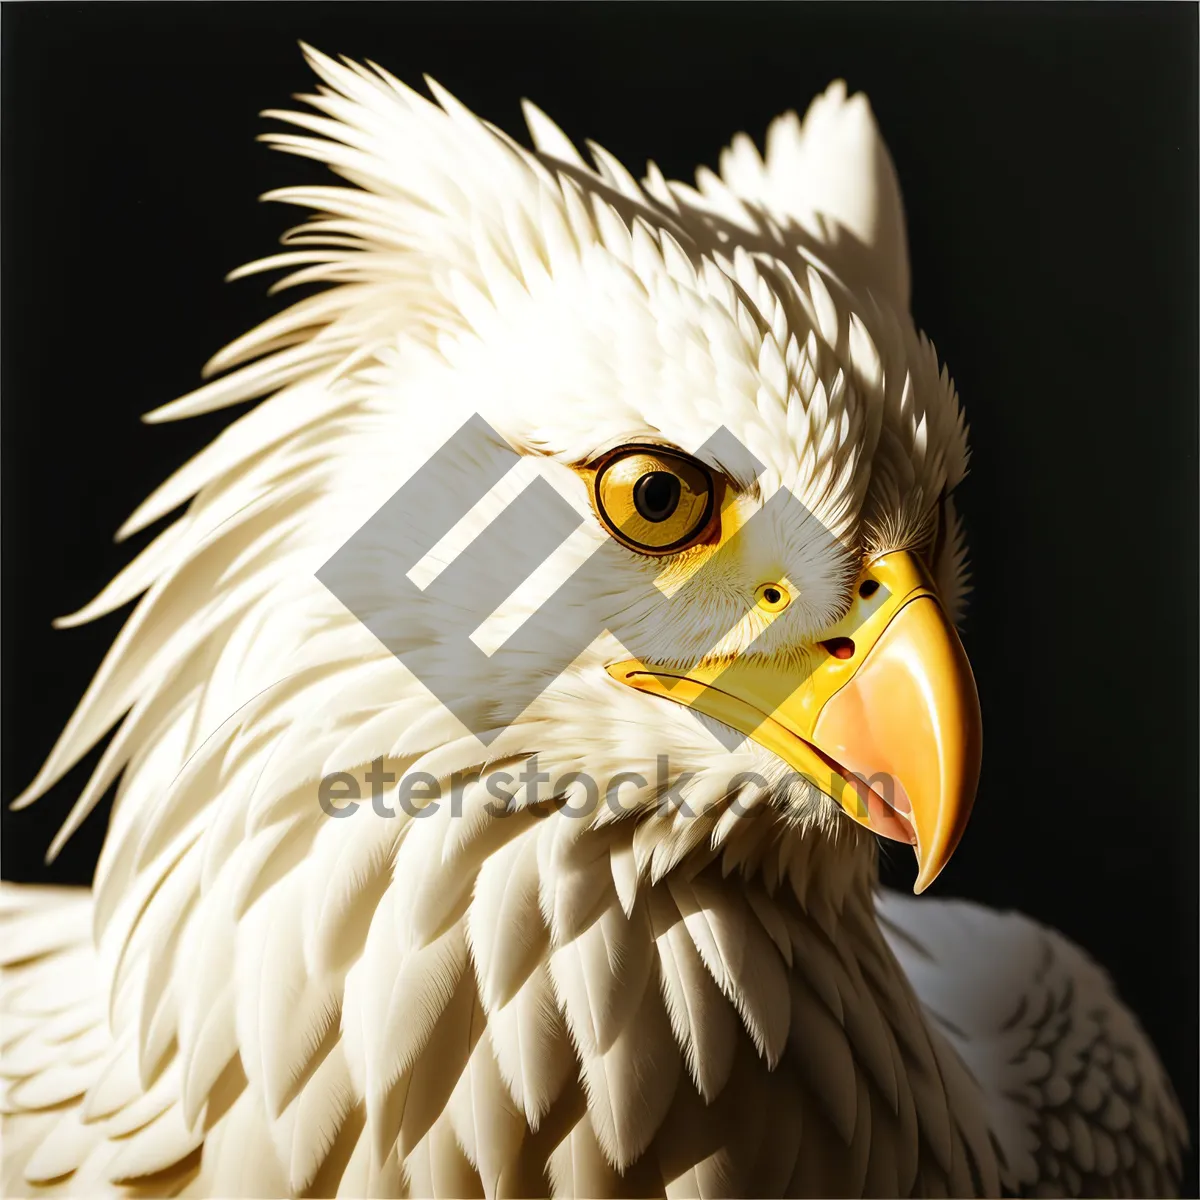 Picture of Majestic Bald Eagle with Piercing Eyes: King of the Skies